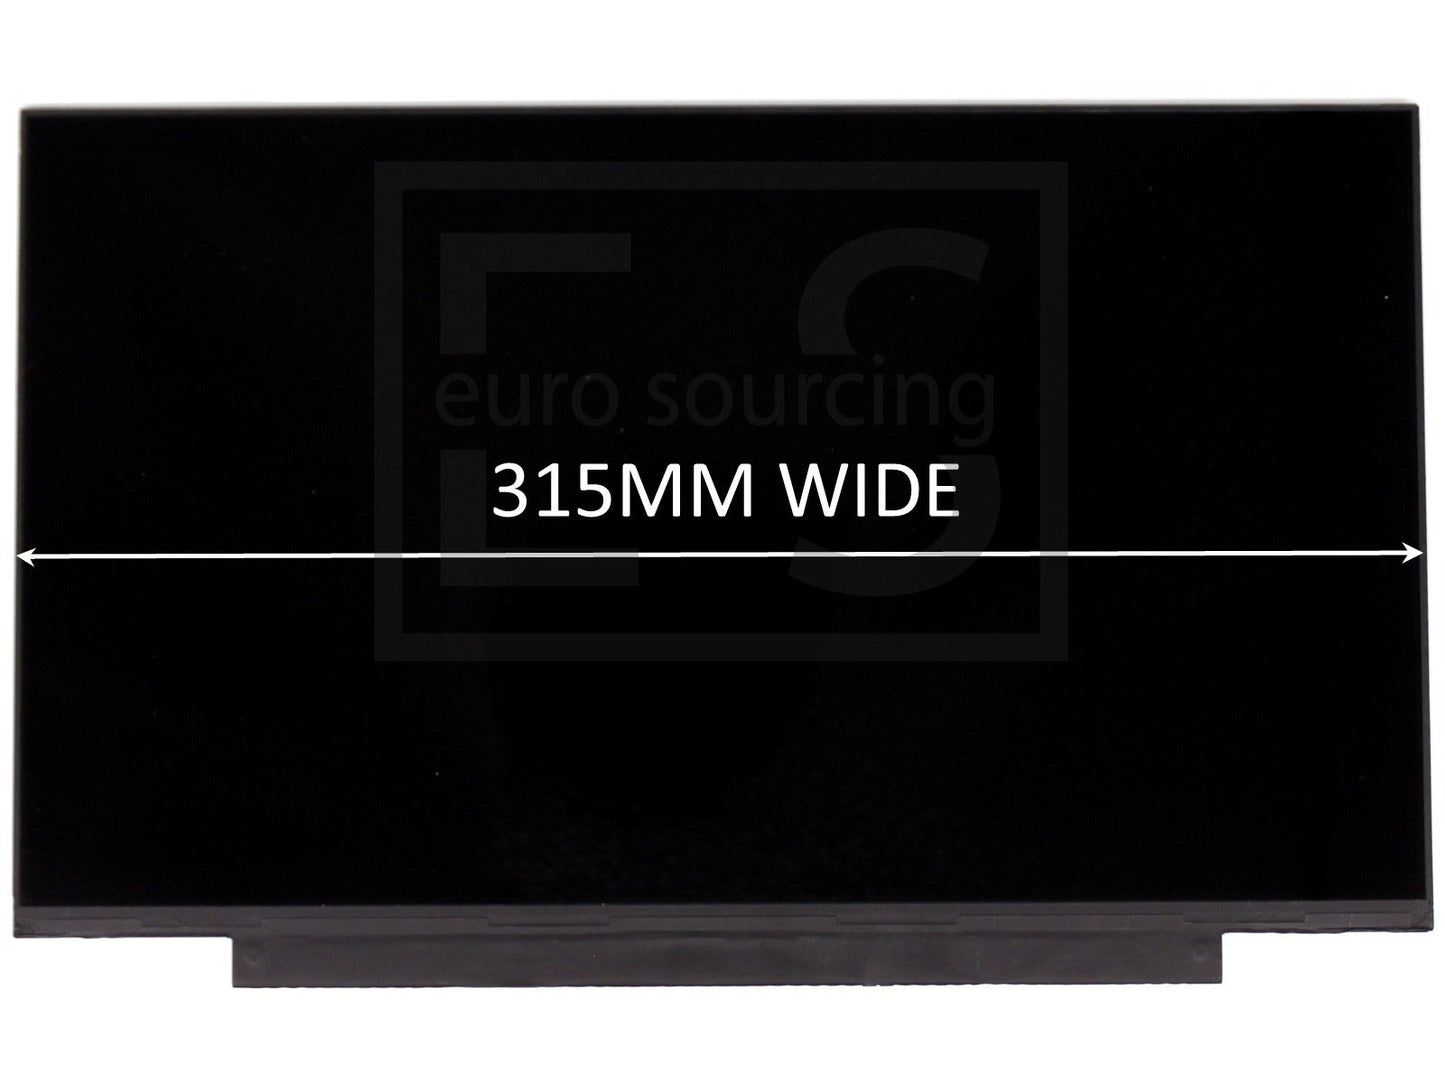 Replacement For N140HGE-EA1 14" LED LCD Screen Matte FHD Non-IPS 315MM Display Panel -Without Brackets Compatible With ACER SWIFT 3 SF314-43-R38H